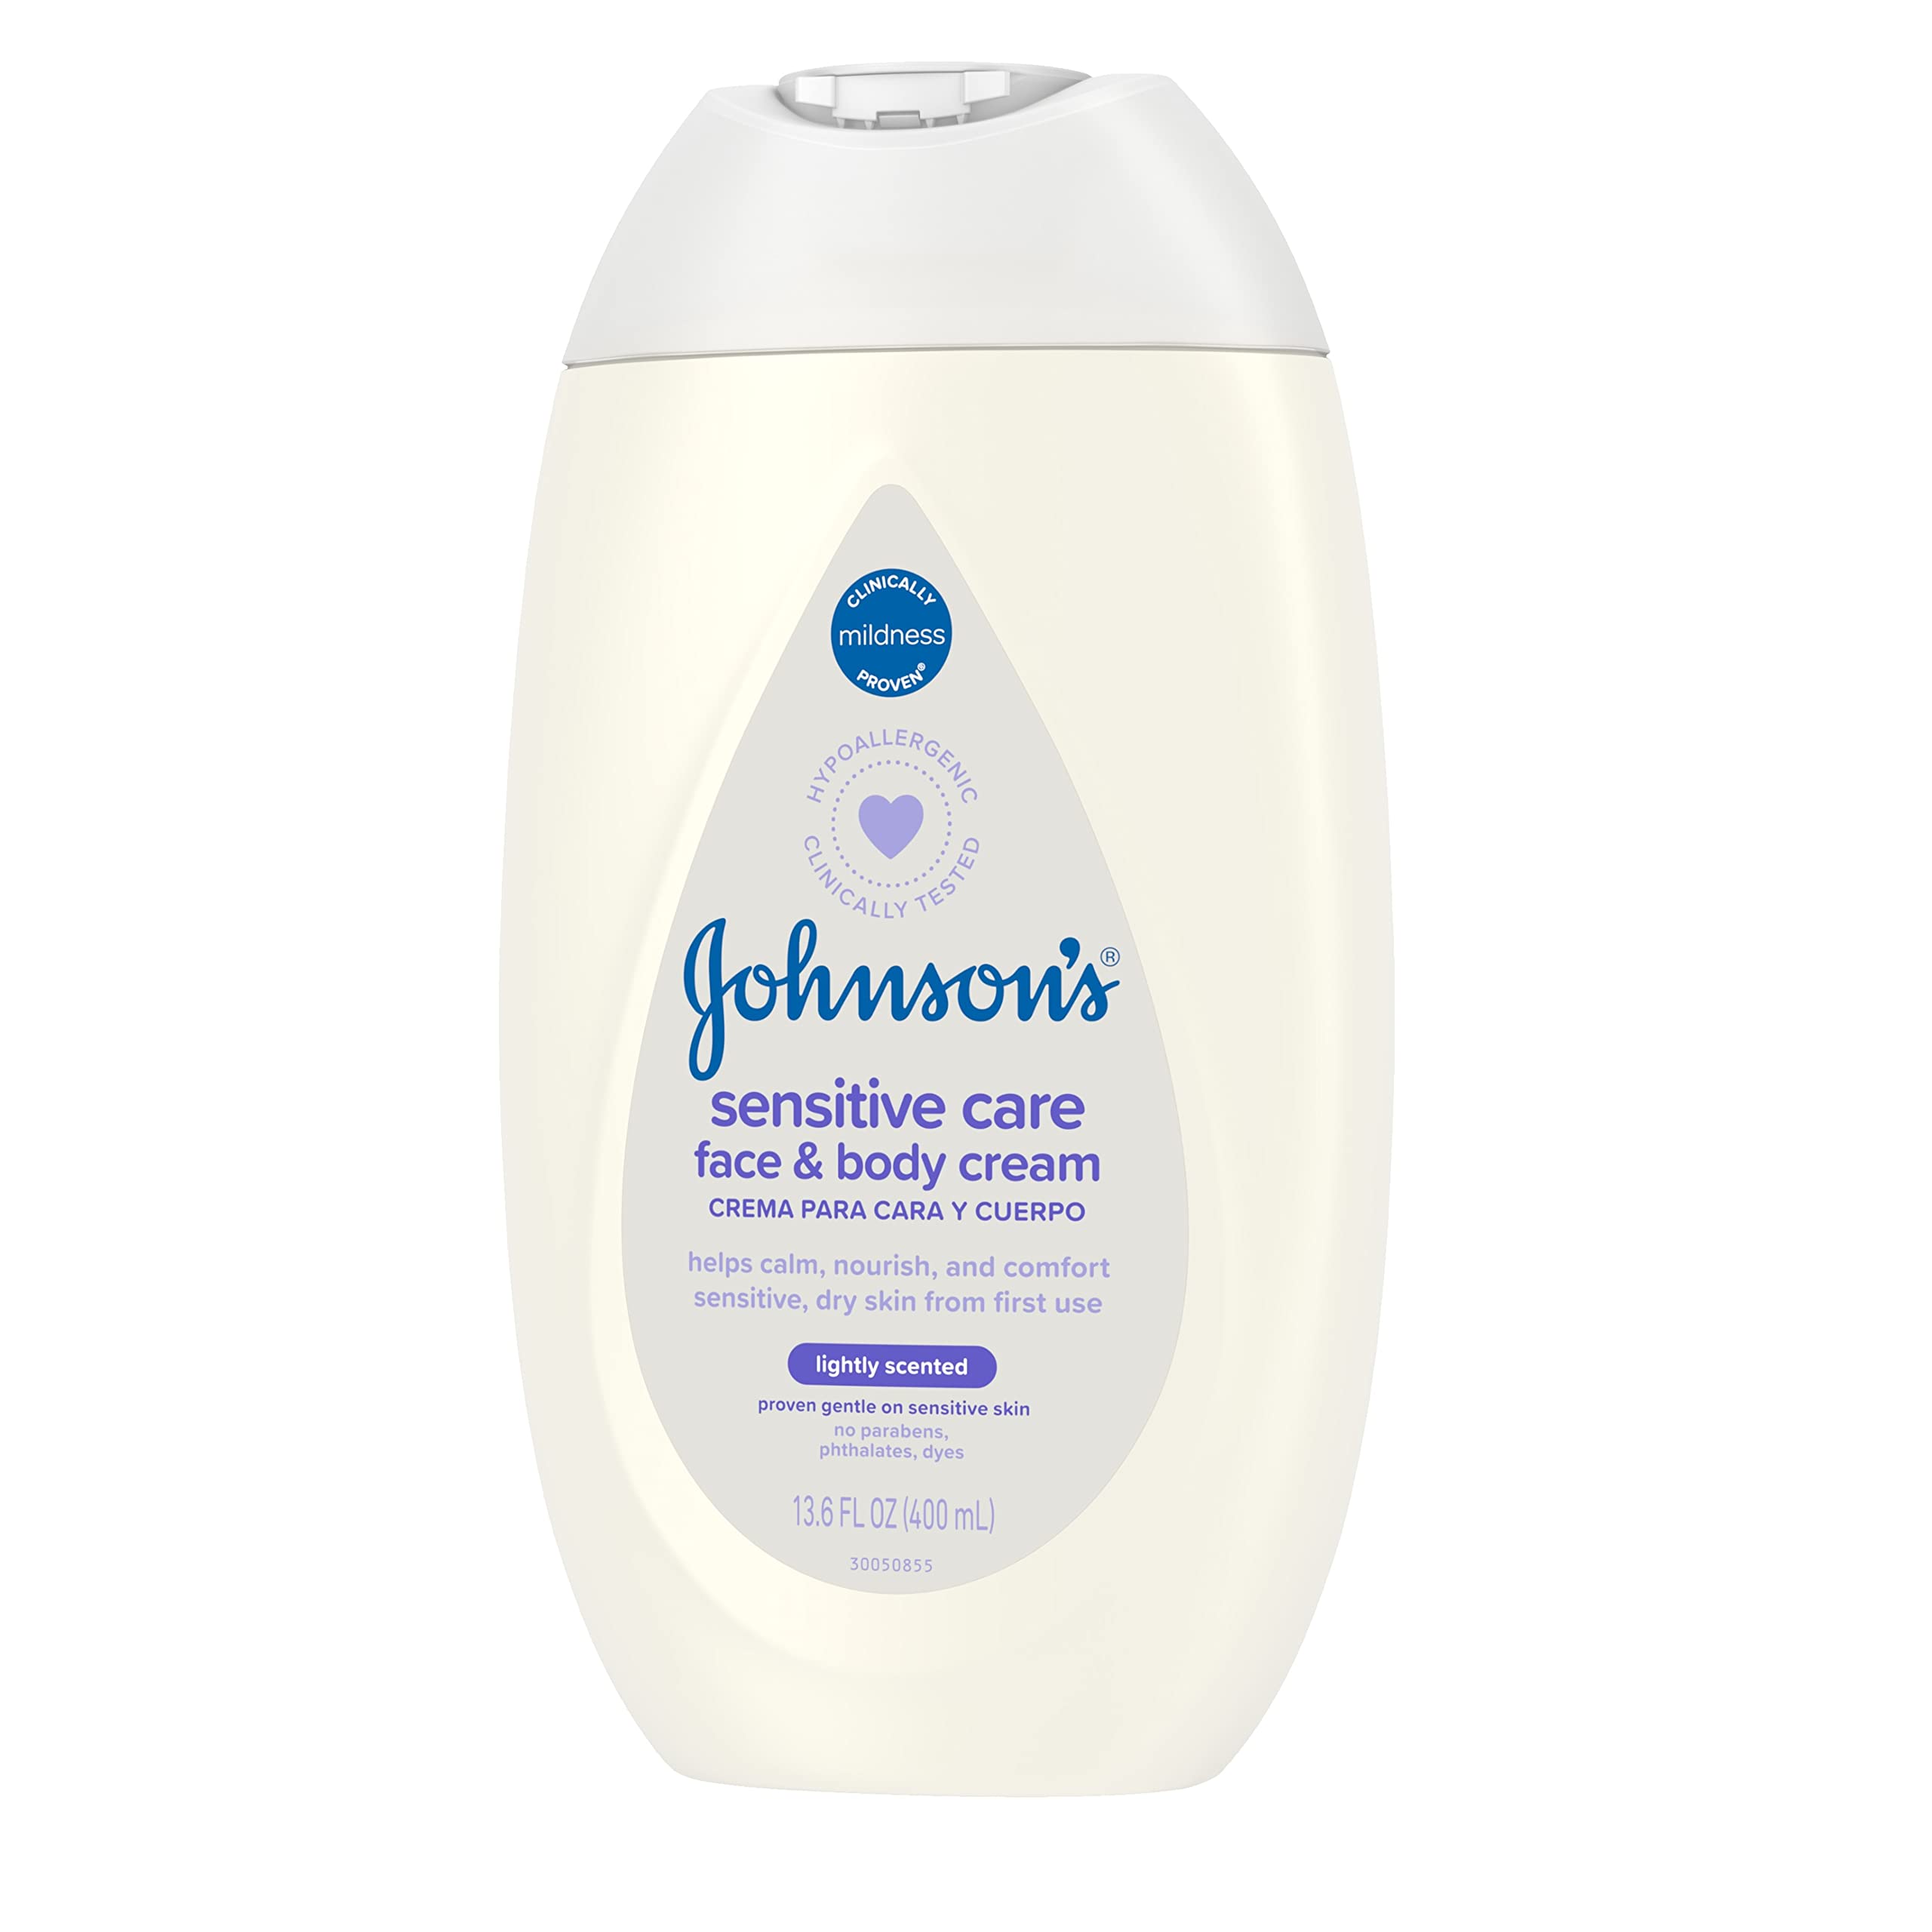 Johnson's Sensitive Care Face & Body Cream for Babies, Daily Moisturizing Baby Cream to Calm, Nourish & Comfort Dry, Sensitive Skin, Lightly Scented, No Greasy Feel, Hypoallergenic, 13.6 fl. oz